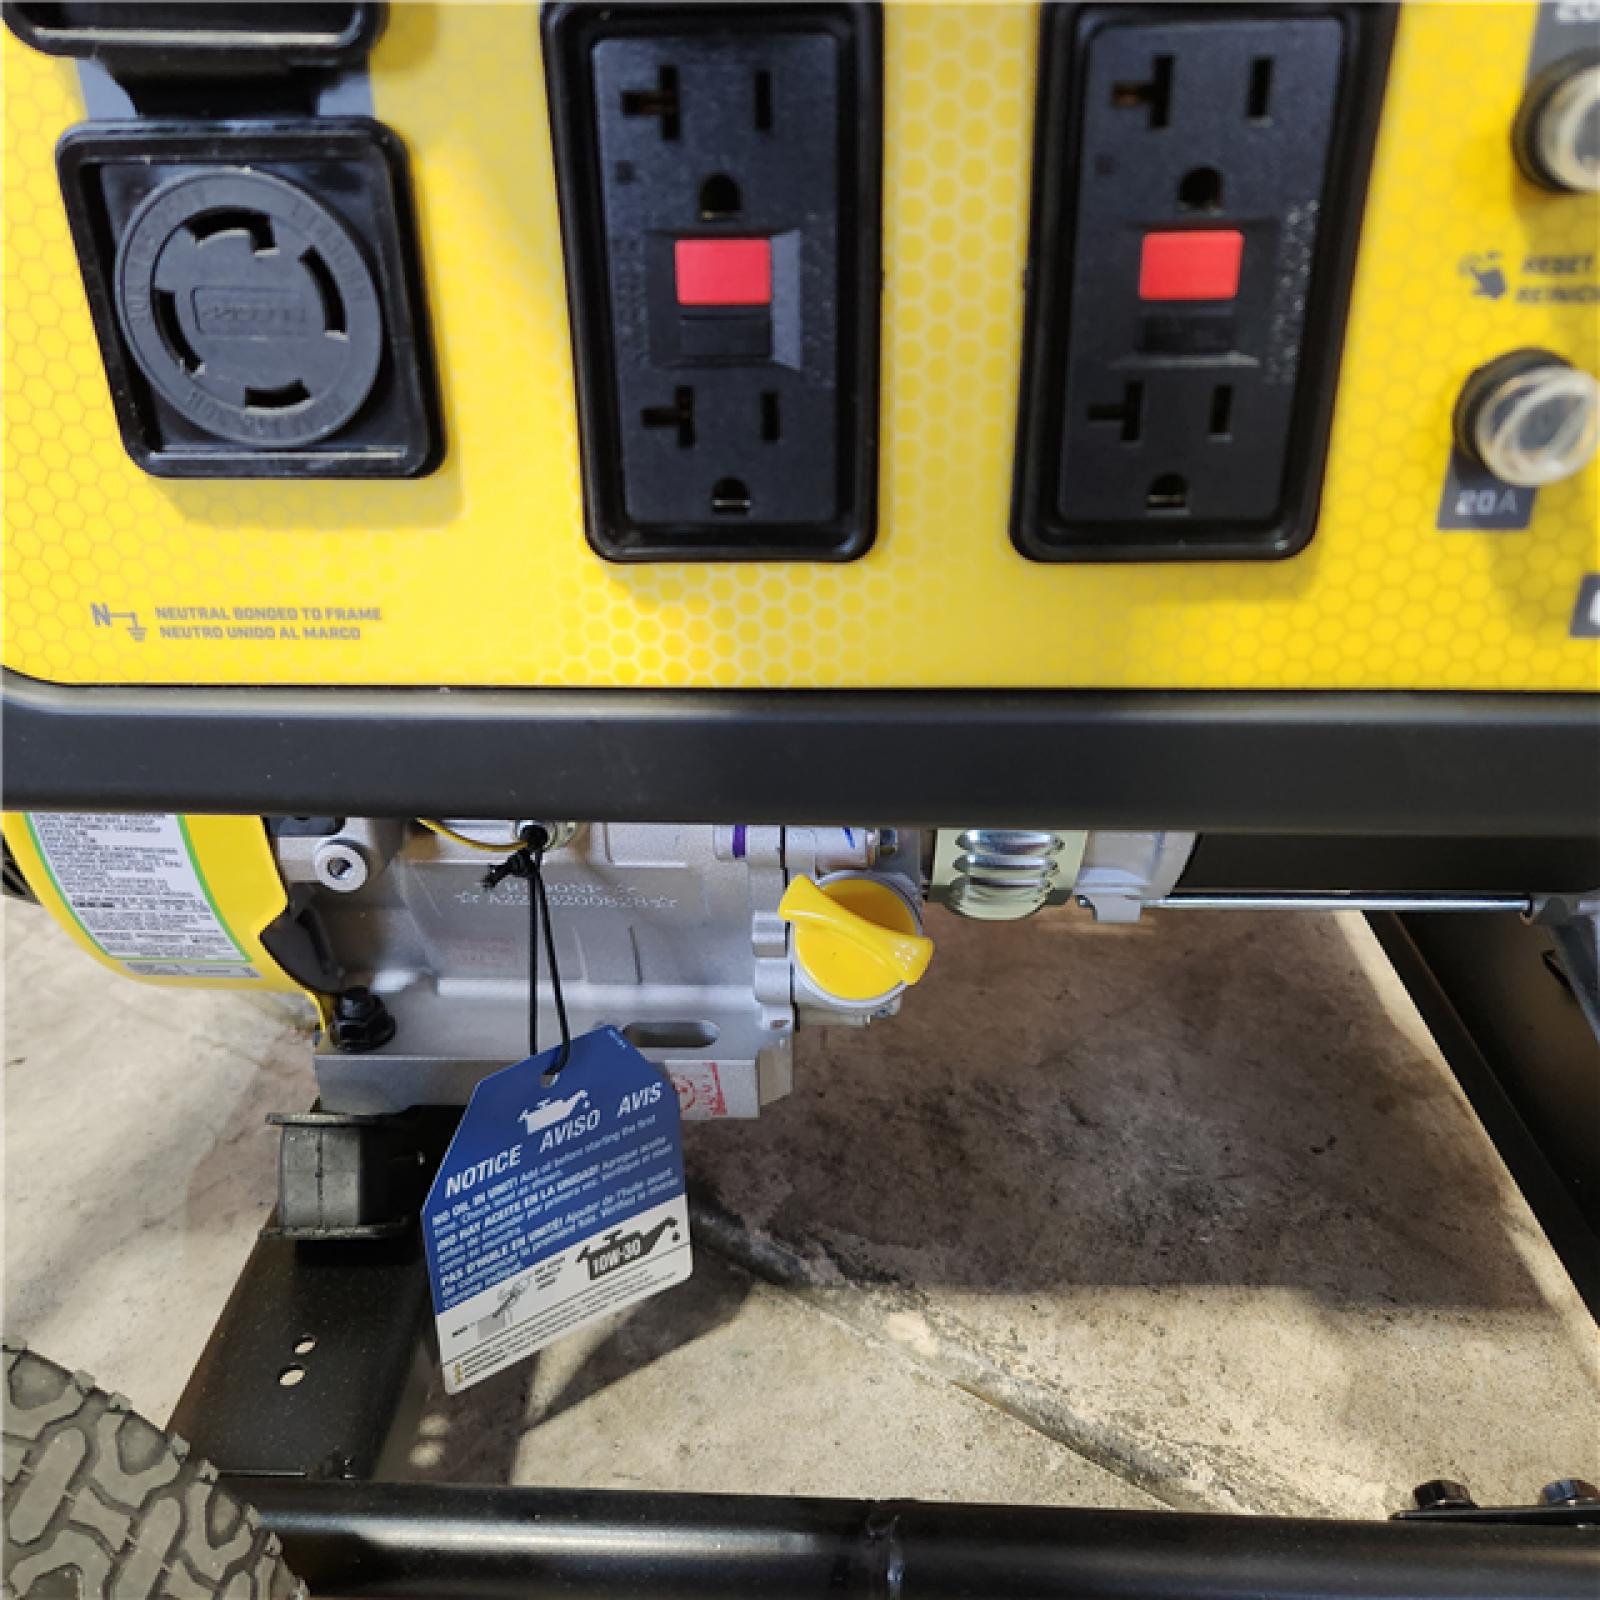 Houston Location - AS-IS Champion Power Equipment 4375/3500 Watt Dual Fuel RV Ready Portable Generator - Appears IN GOOD Condition